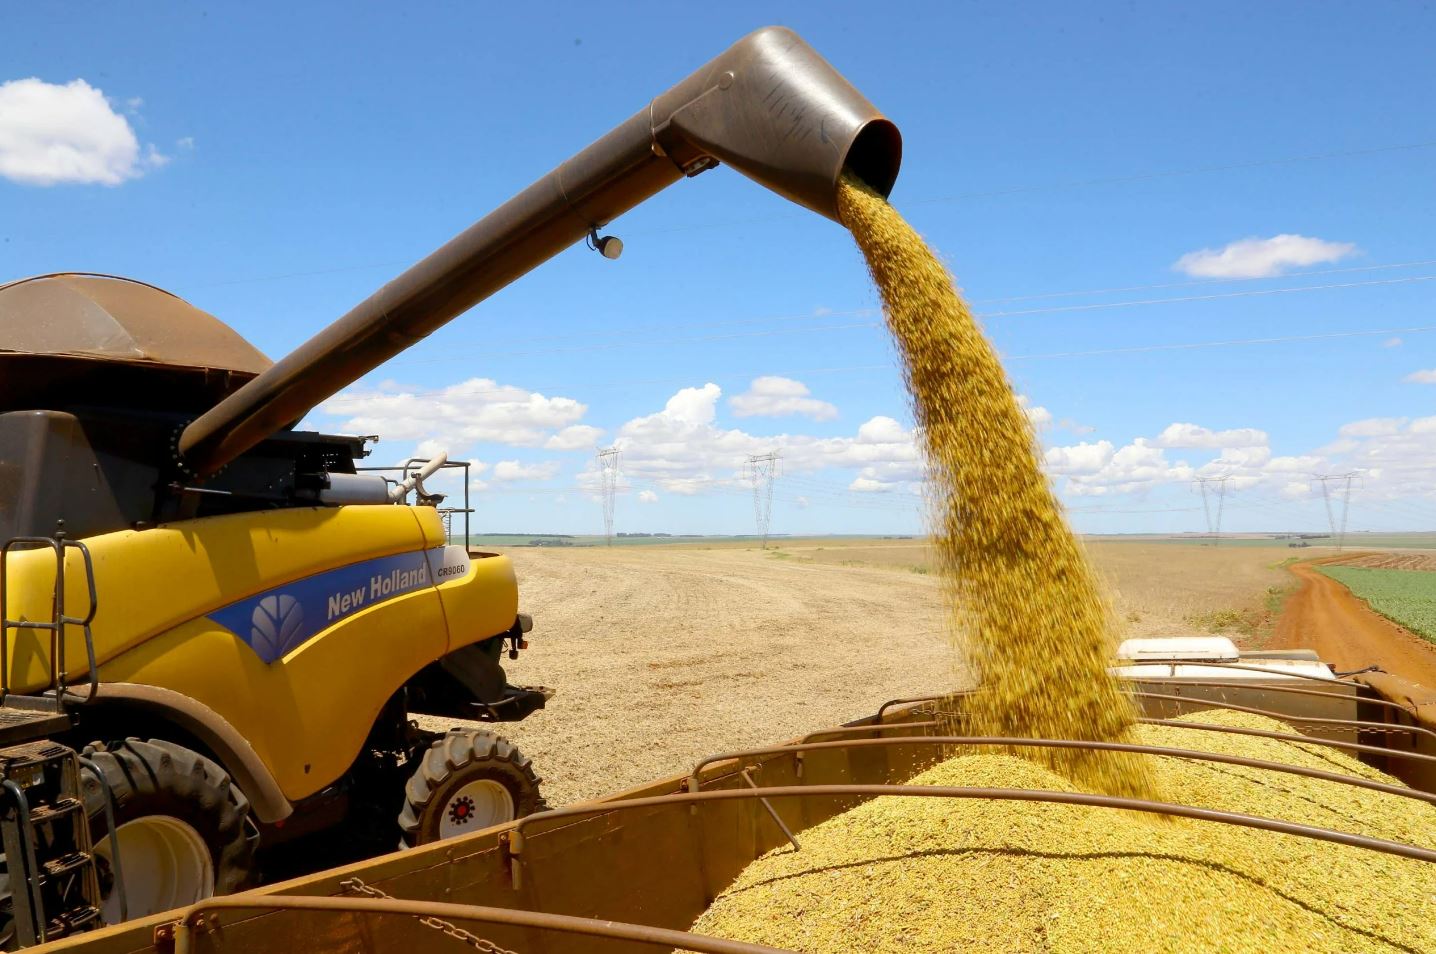 From Paraguay, Argentine soybeans could be sold abroad for more than US$500 per ton, compared to the US$200 obtained from Argentina.